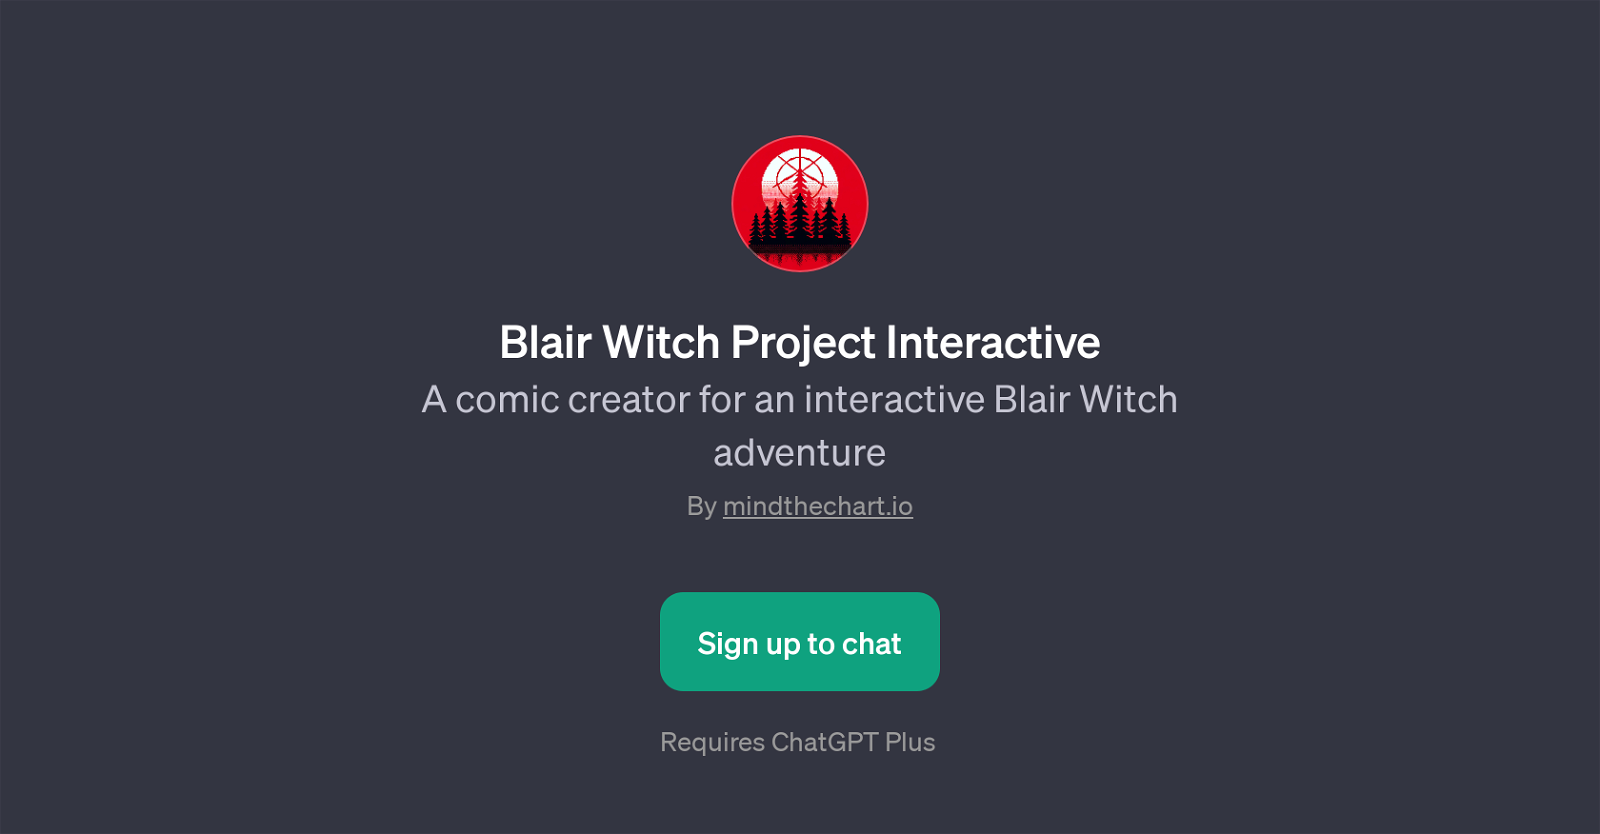 Blair Witch Project Interactive website